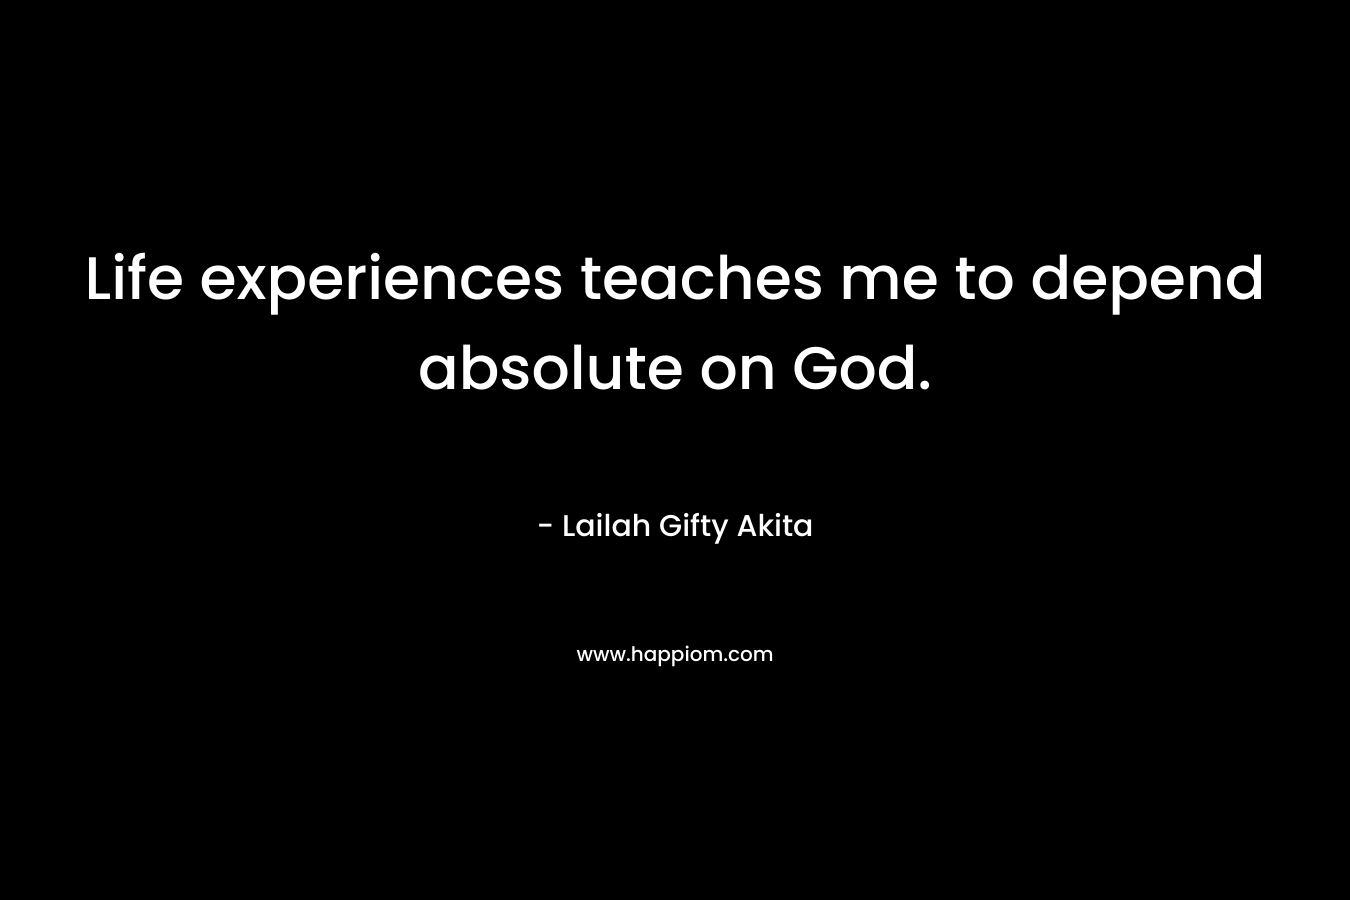 Life experiences teaches me to depend absolute on God.